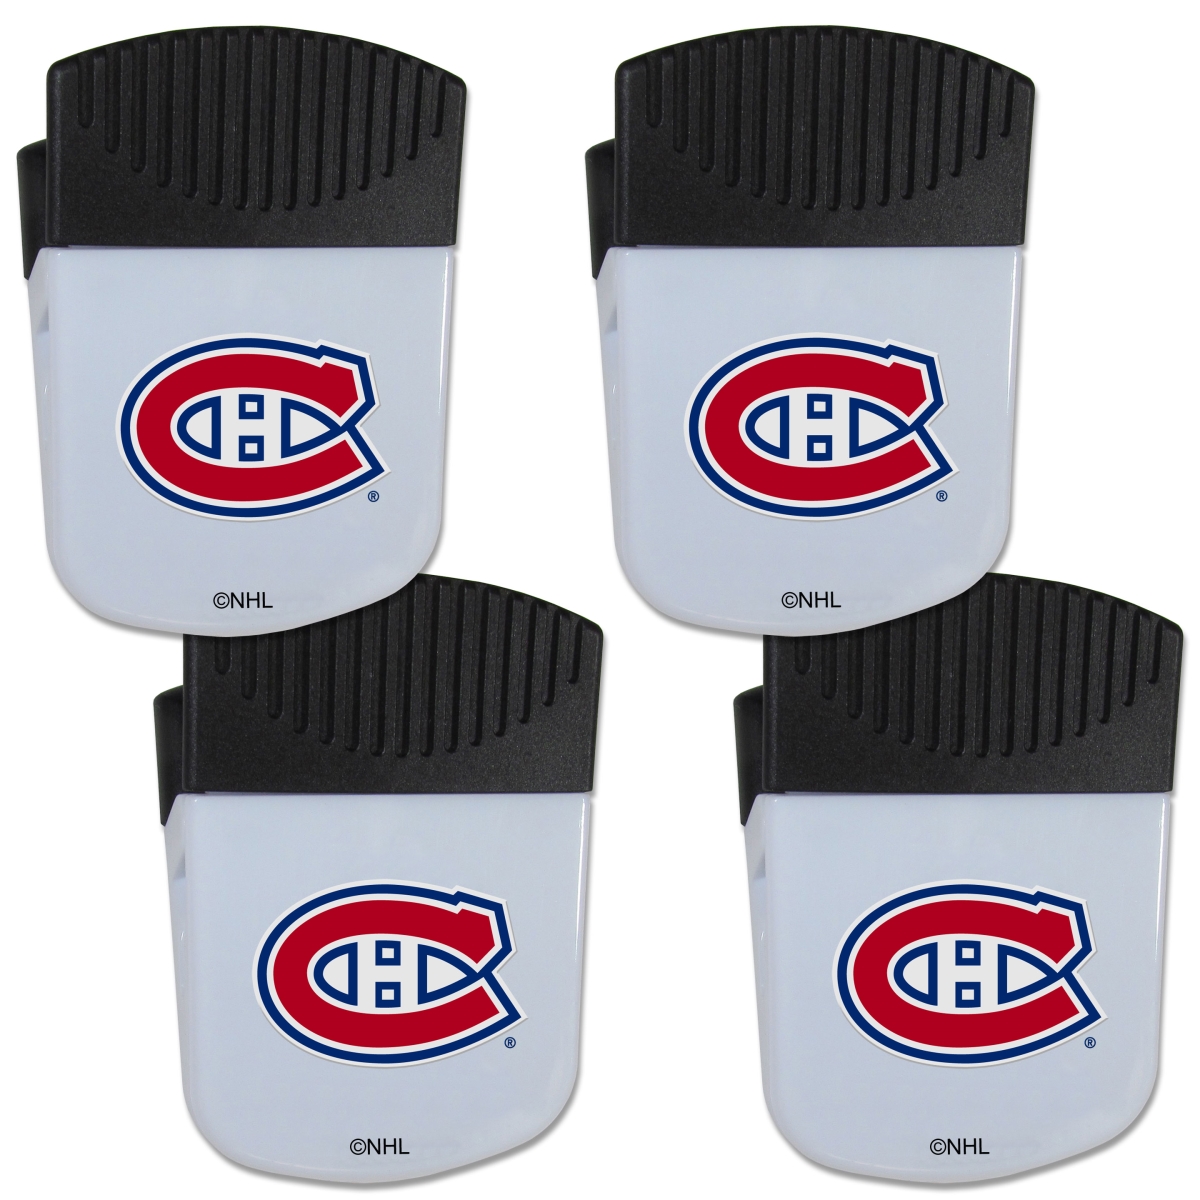 Siskiyou Sports Siskiyou 4HPMC30 Unisex NHL Montreal Canadiens Chip Clip Magnet with Bottle Opener - Pack of 4